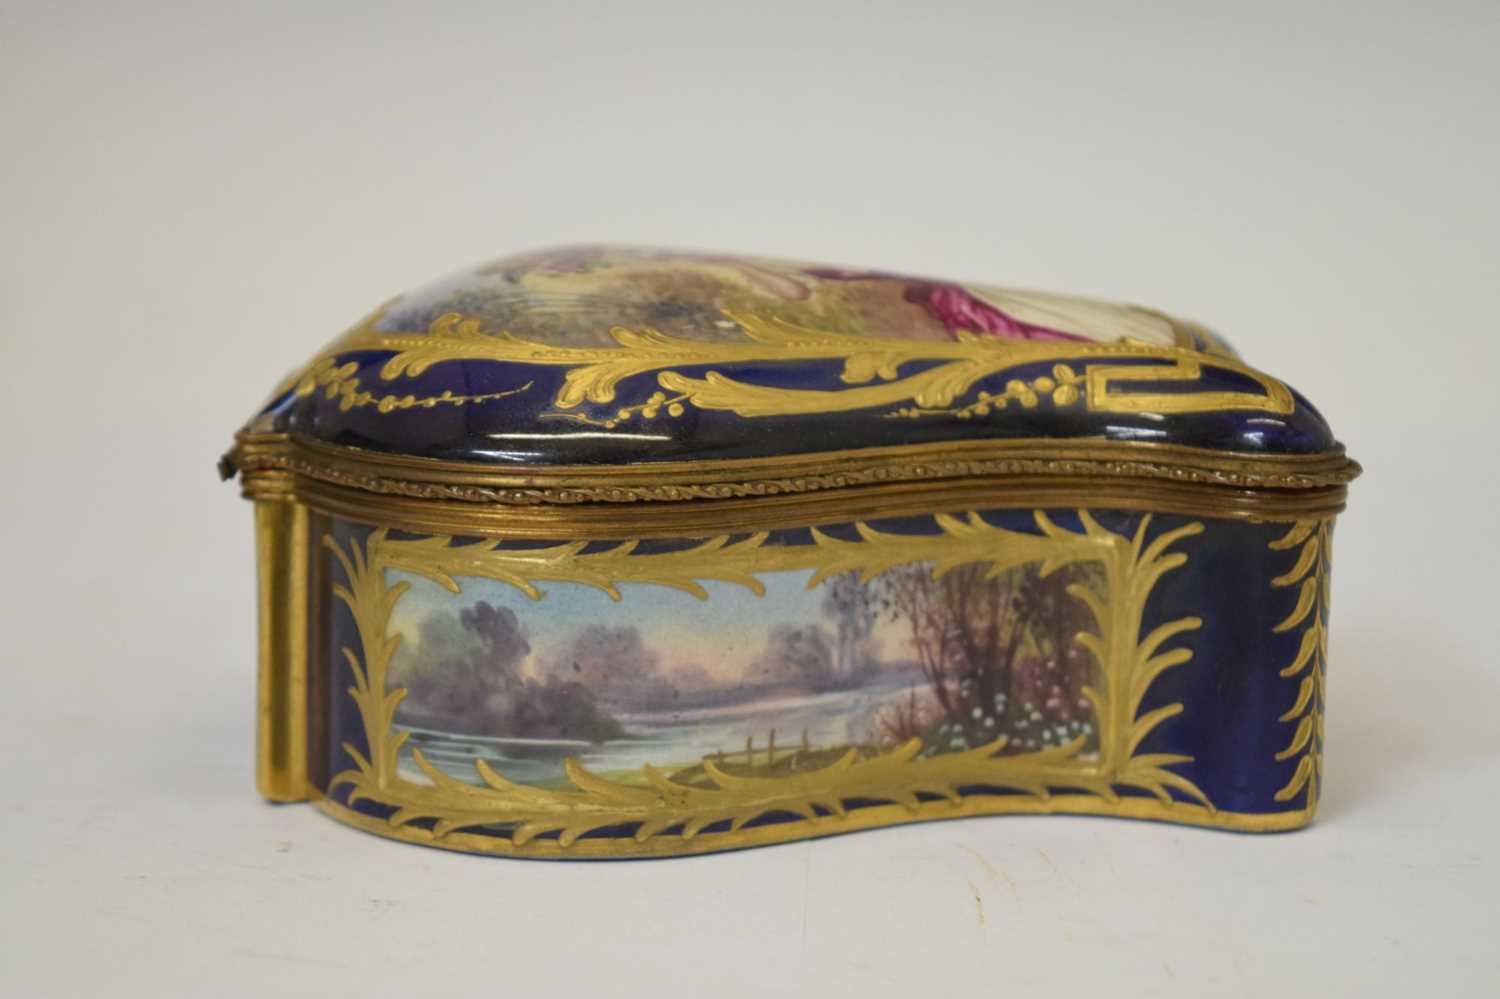 18th century-style porcelain and gilt metal box - Image 3 of 8